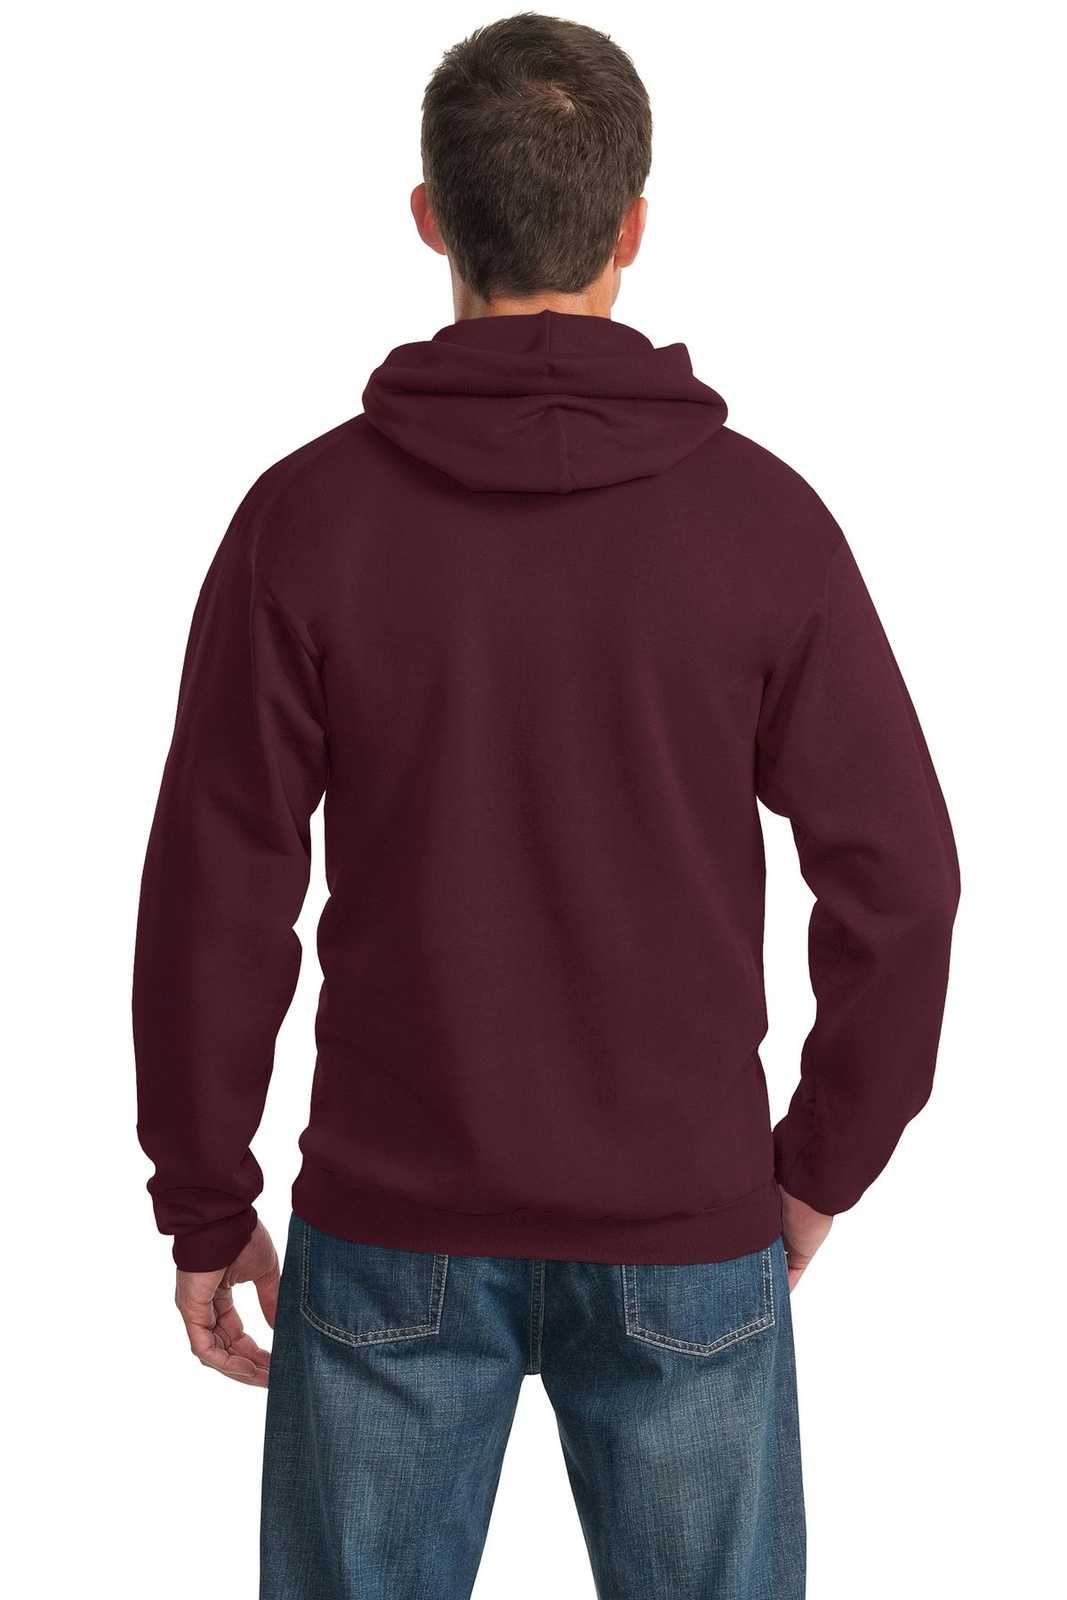 Port & Company PC90H Essential Fleece Pullover Hooded Sweatshirt - Maroon - HIT a Double - 1